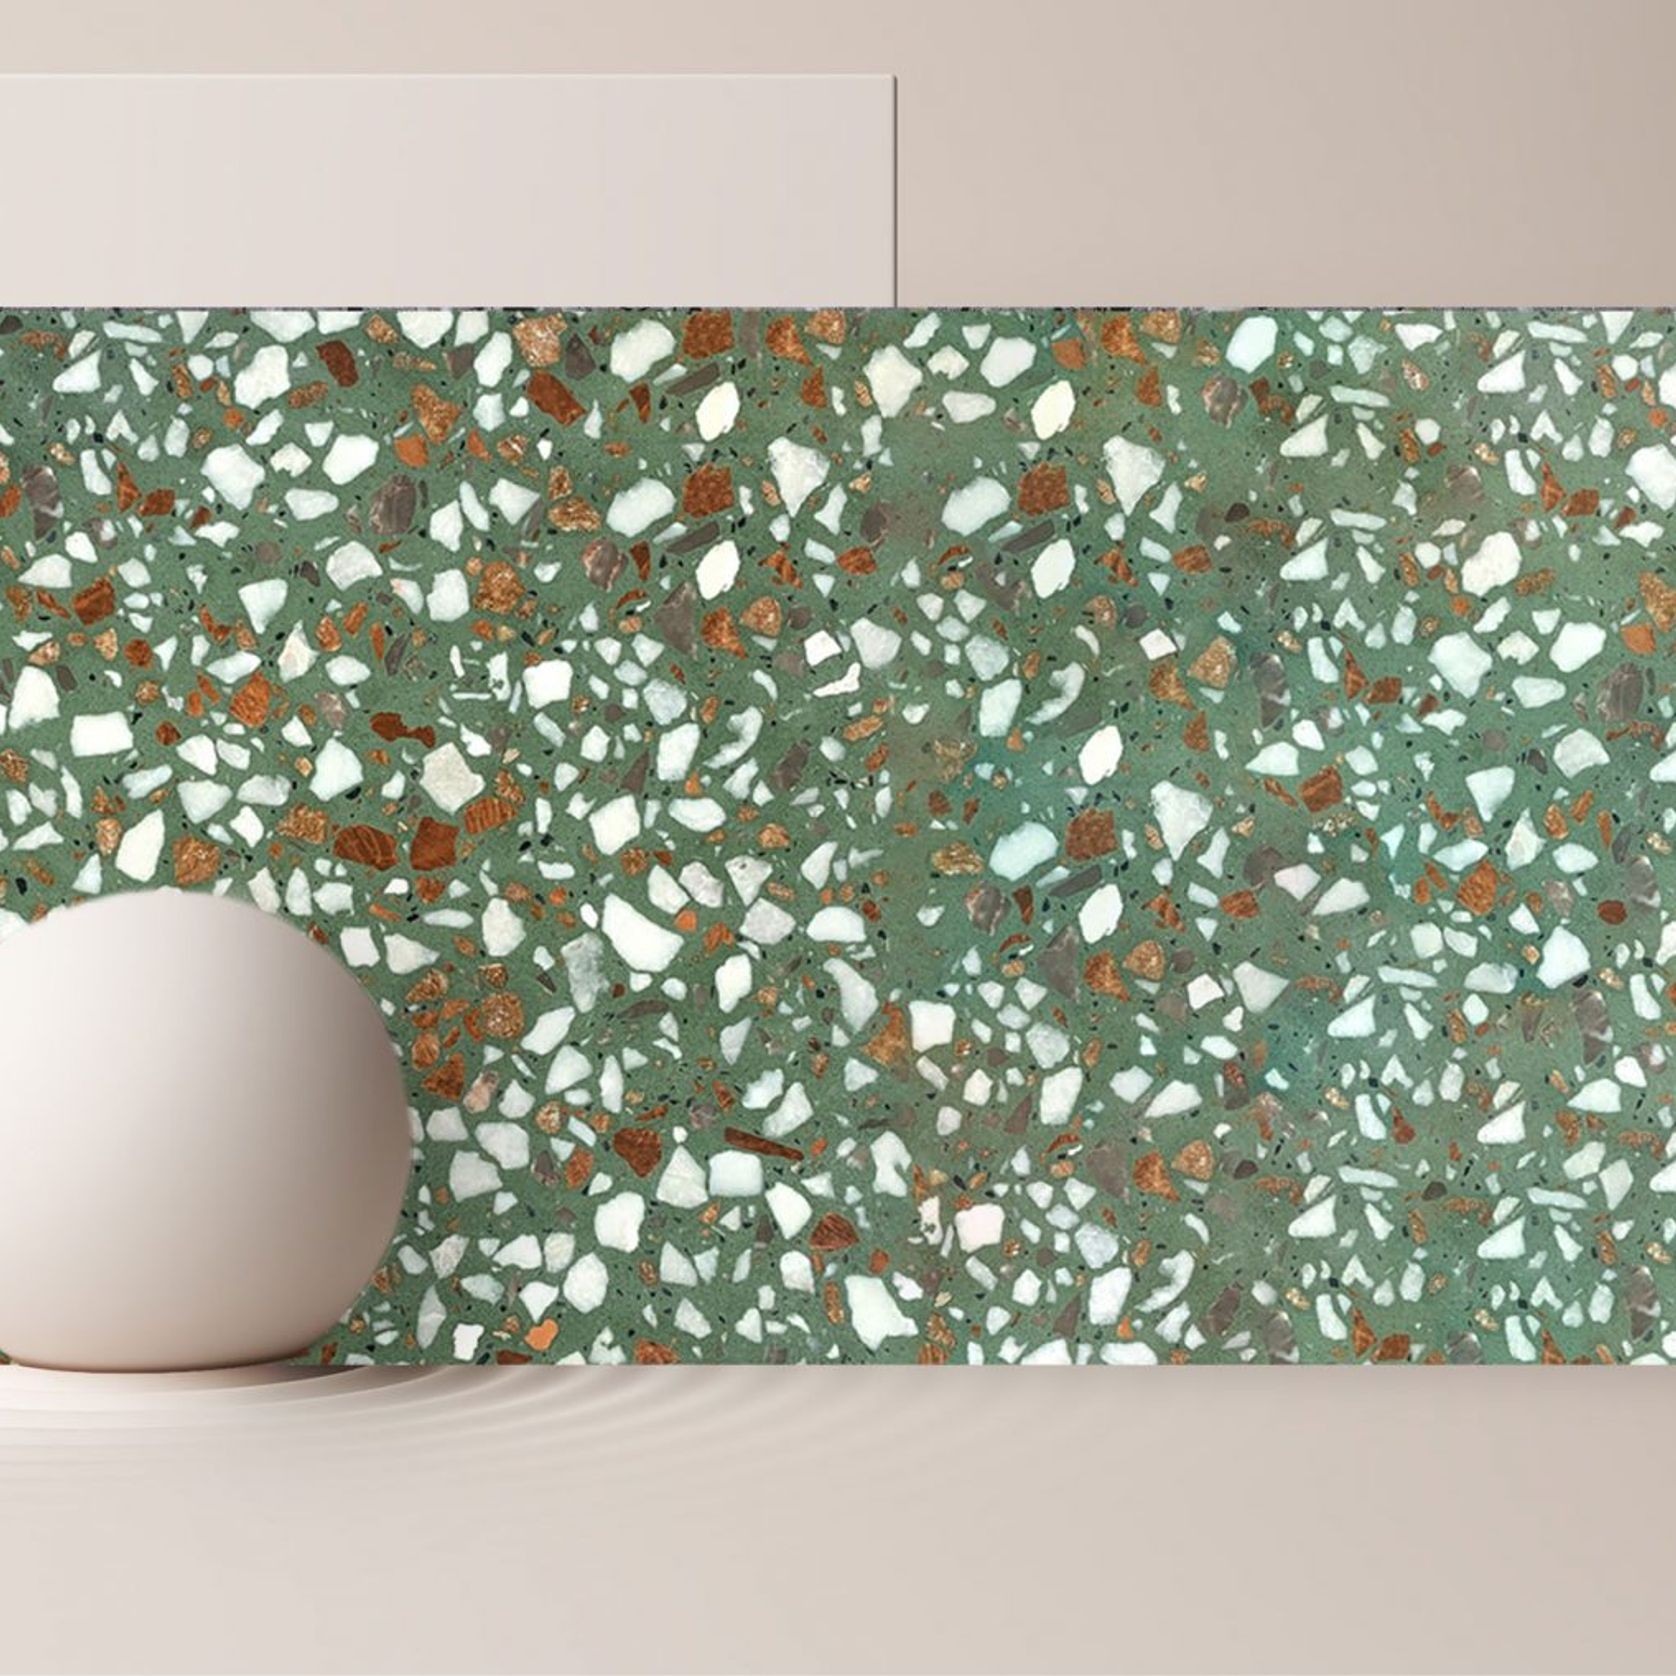 Peppermint Nudge Terrazzo Stone gallery detail image